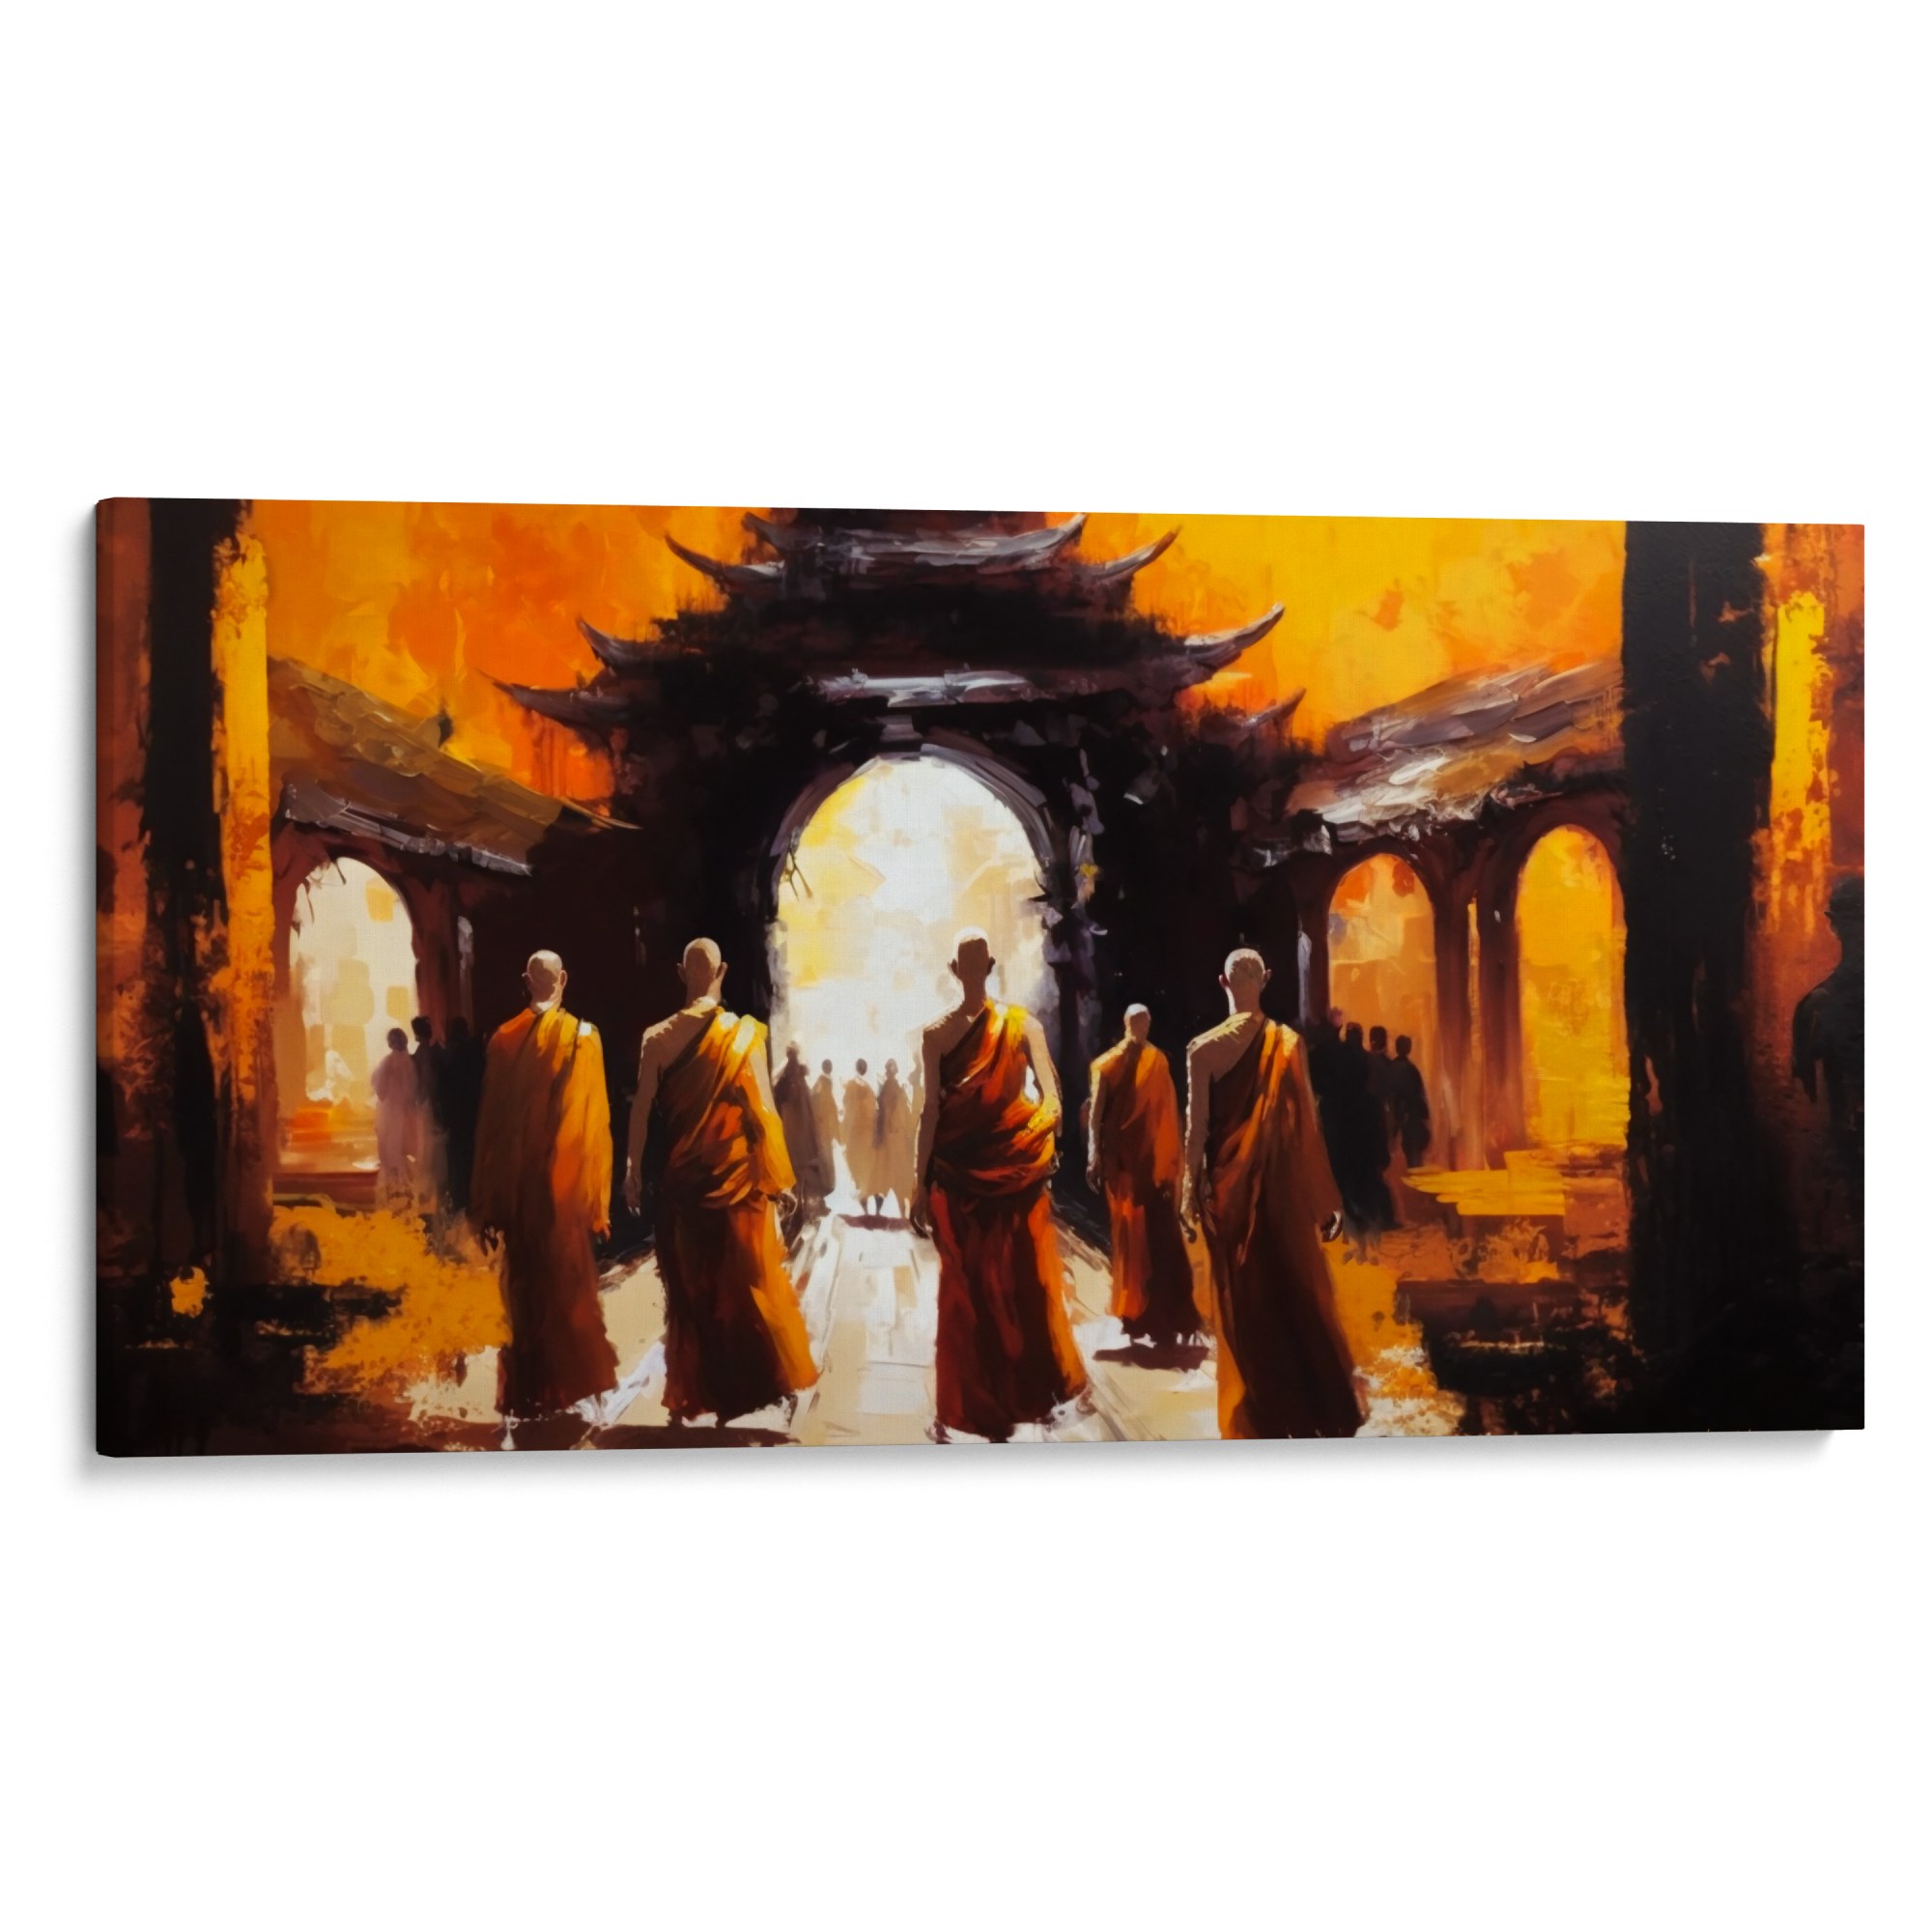 STEPS IN SERENITY Canvas - Monks advancing, hinting at a significant gathering, perfect for spiritual enthusiasts.